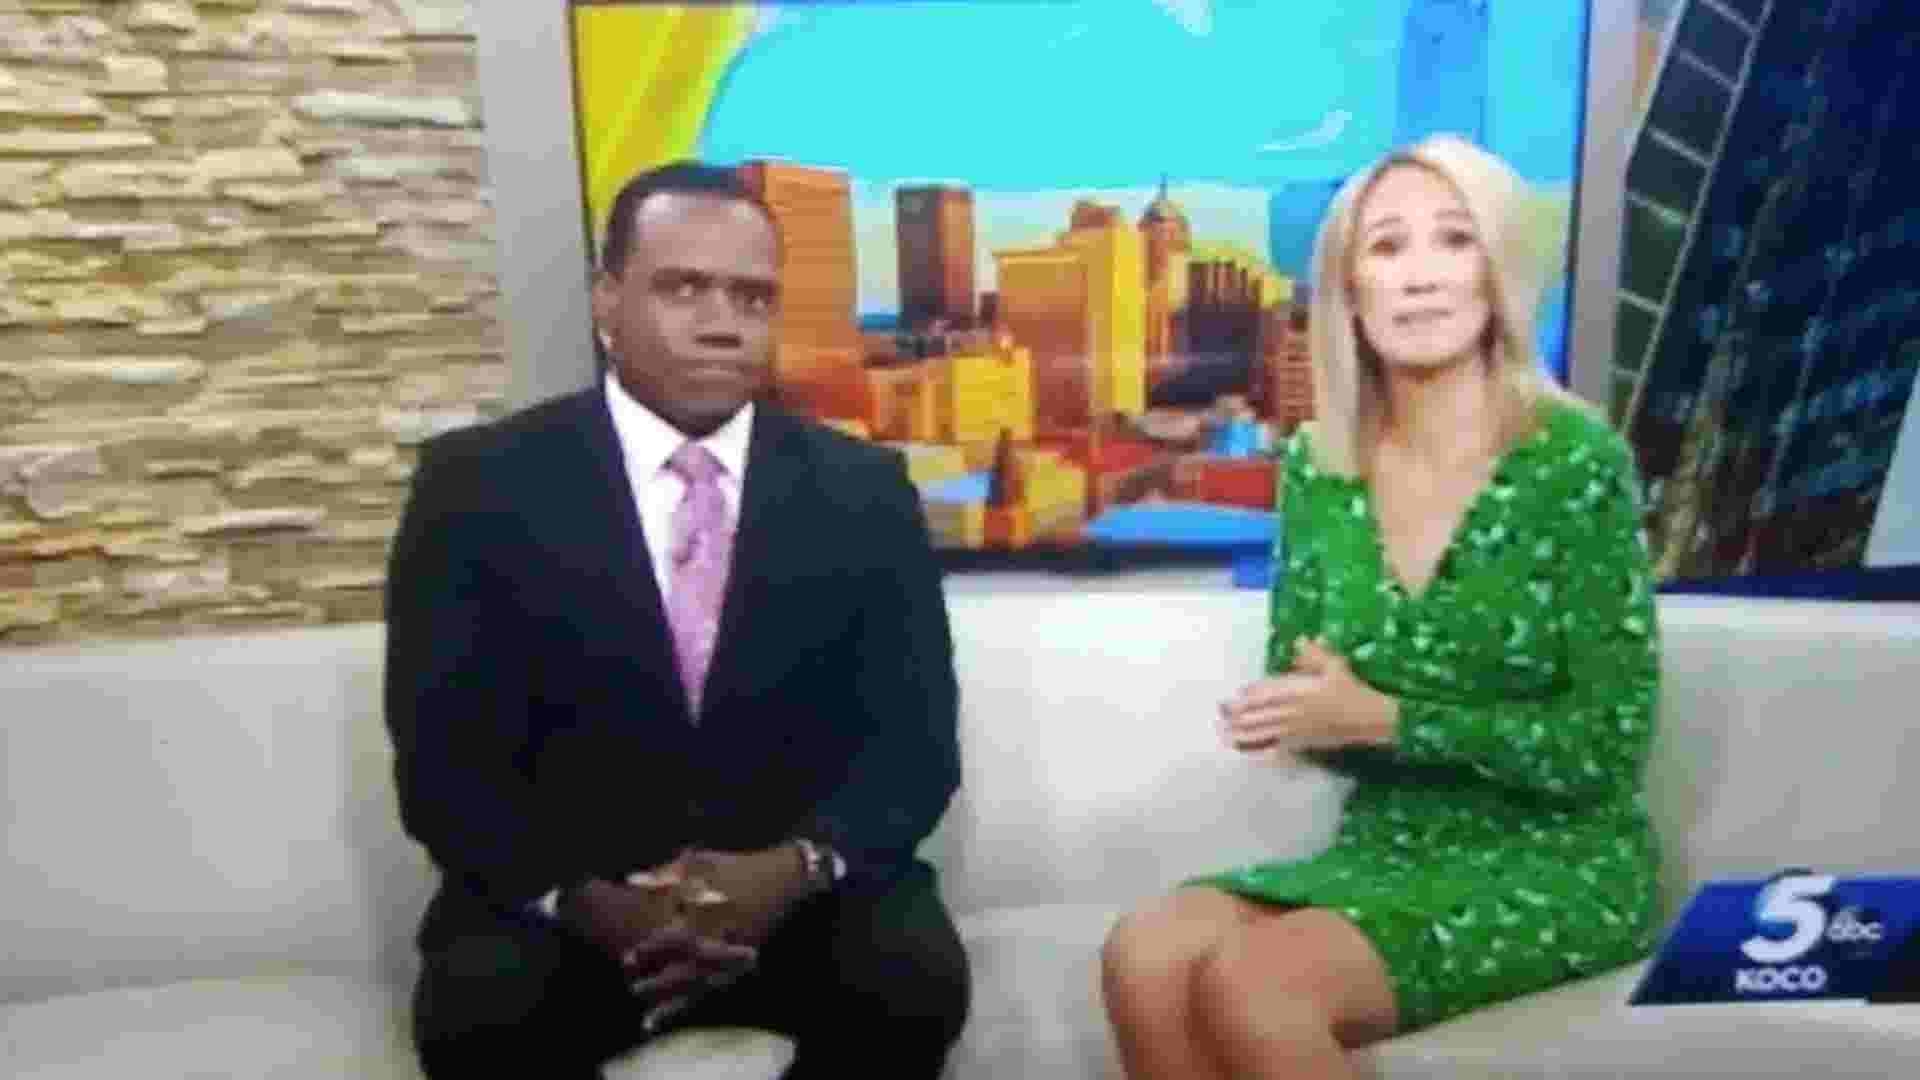 TV host issues tearful apology after saying her black co-anchor looks like a gorilla